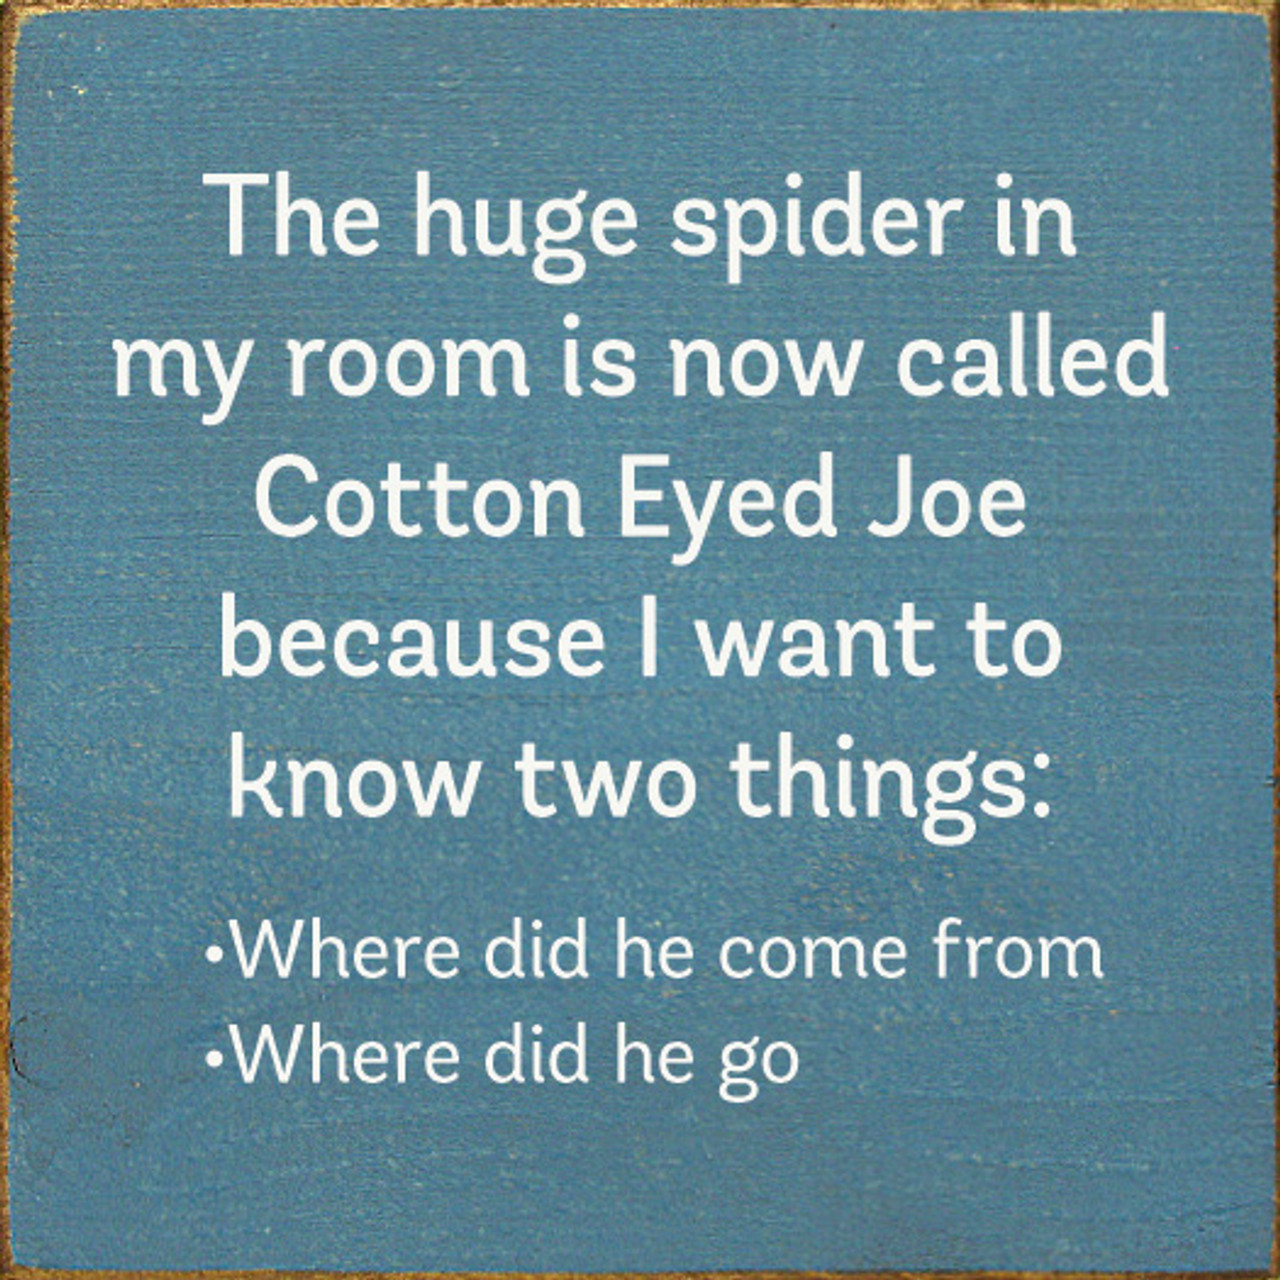 What Is Cotton Eyed Joe About?